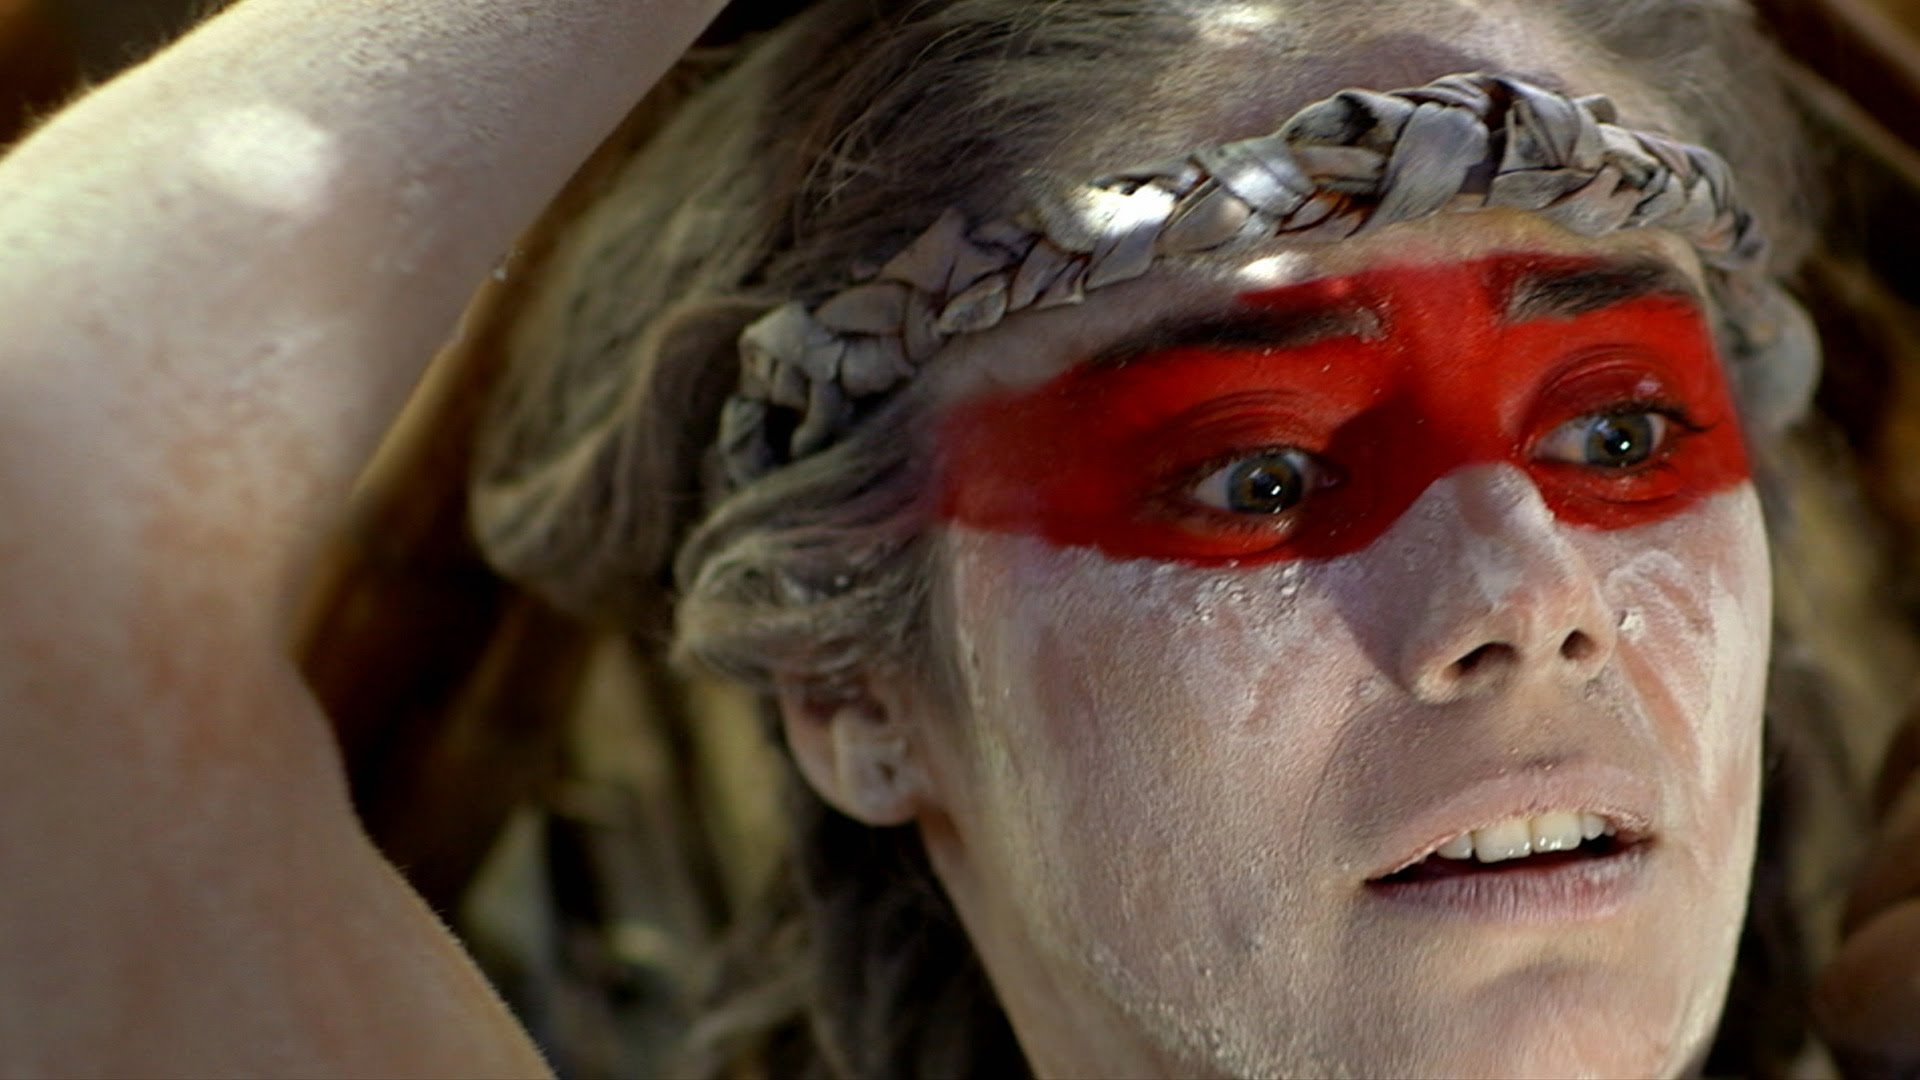 GREEN INFERNO - Image du film 2 Eli Roth Wild Bunch cannibalisme - Go with the Blog